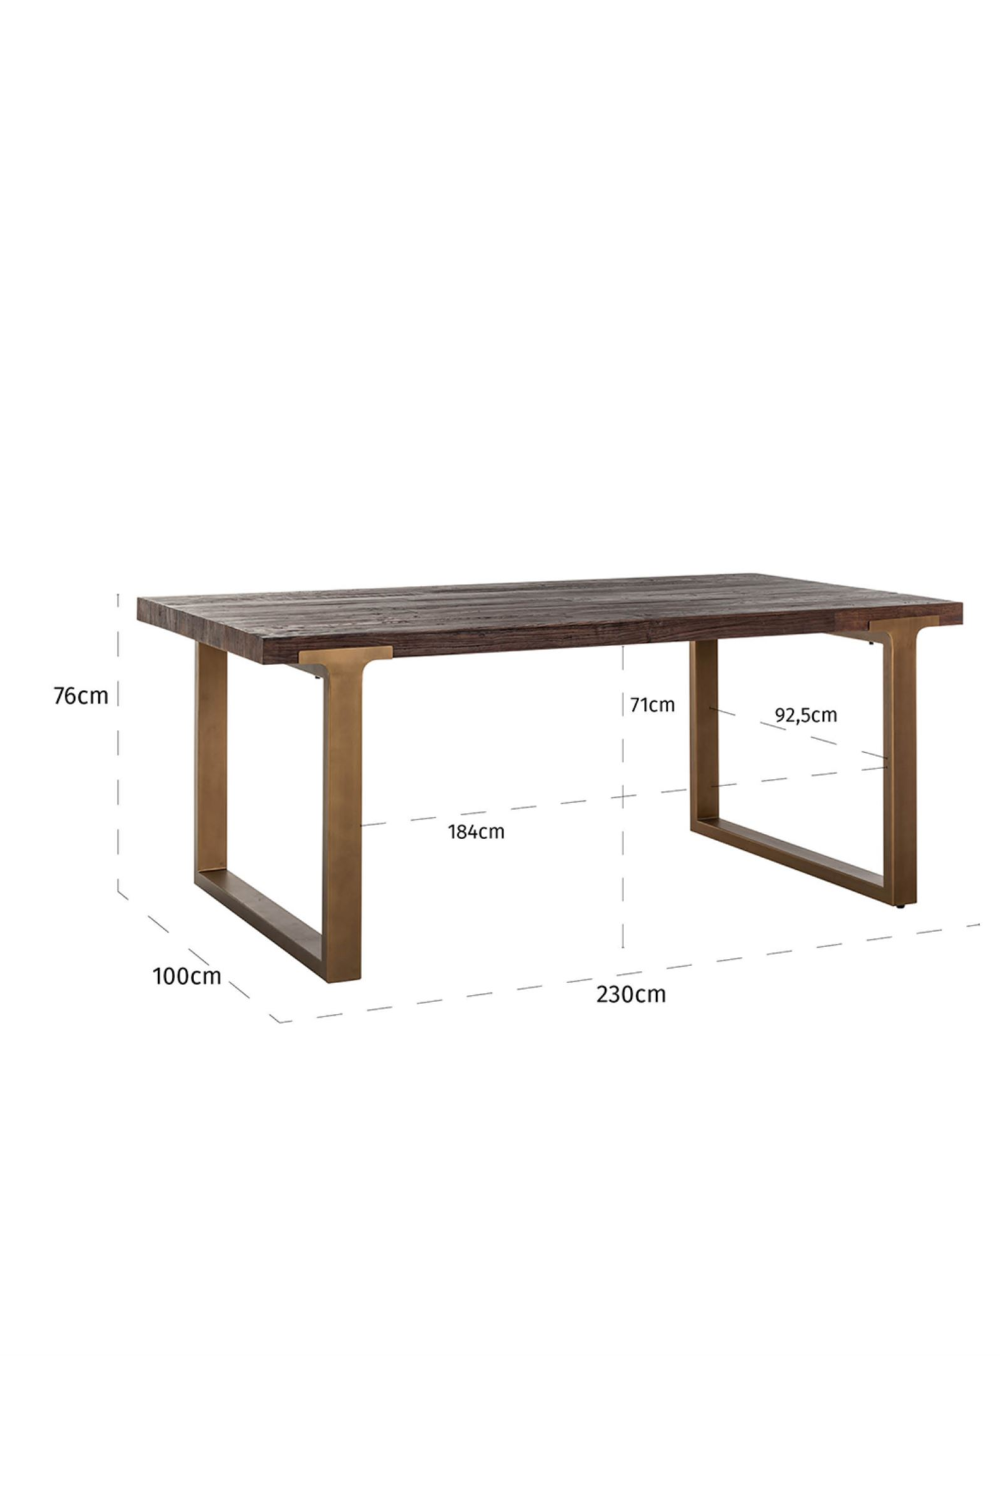 Recycled Elm Gold Base Dining Table | OROA Cromford Mill | OROA.com